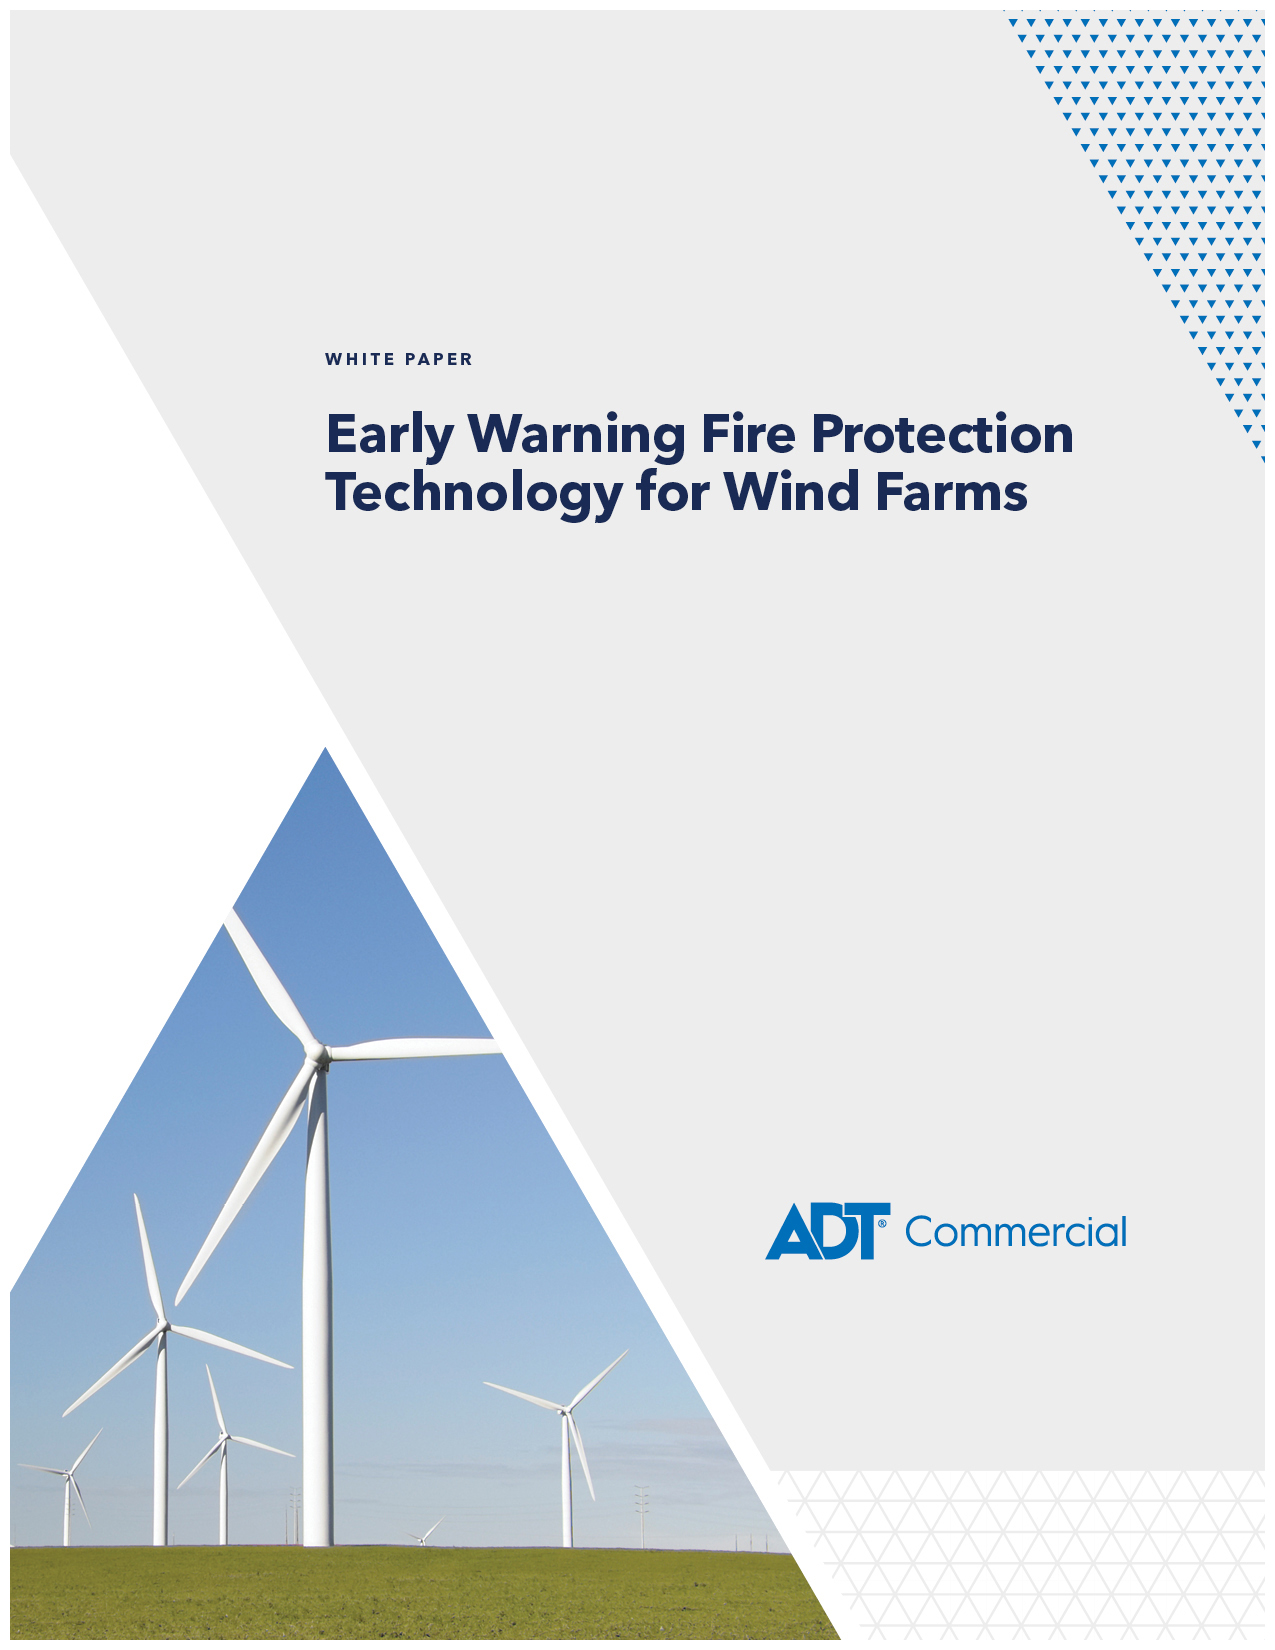 Early Warning Fire Protection Technology for Wind Farms white paper